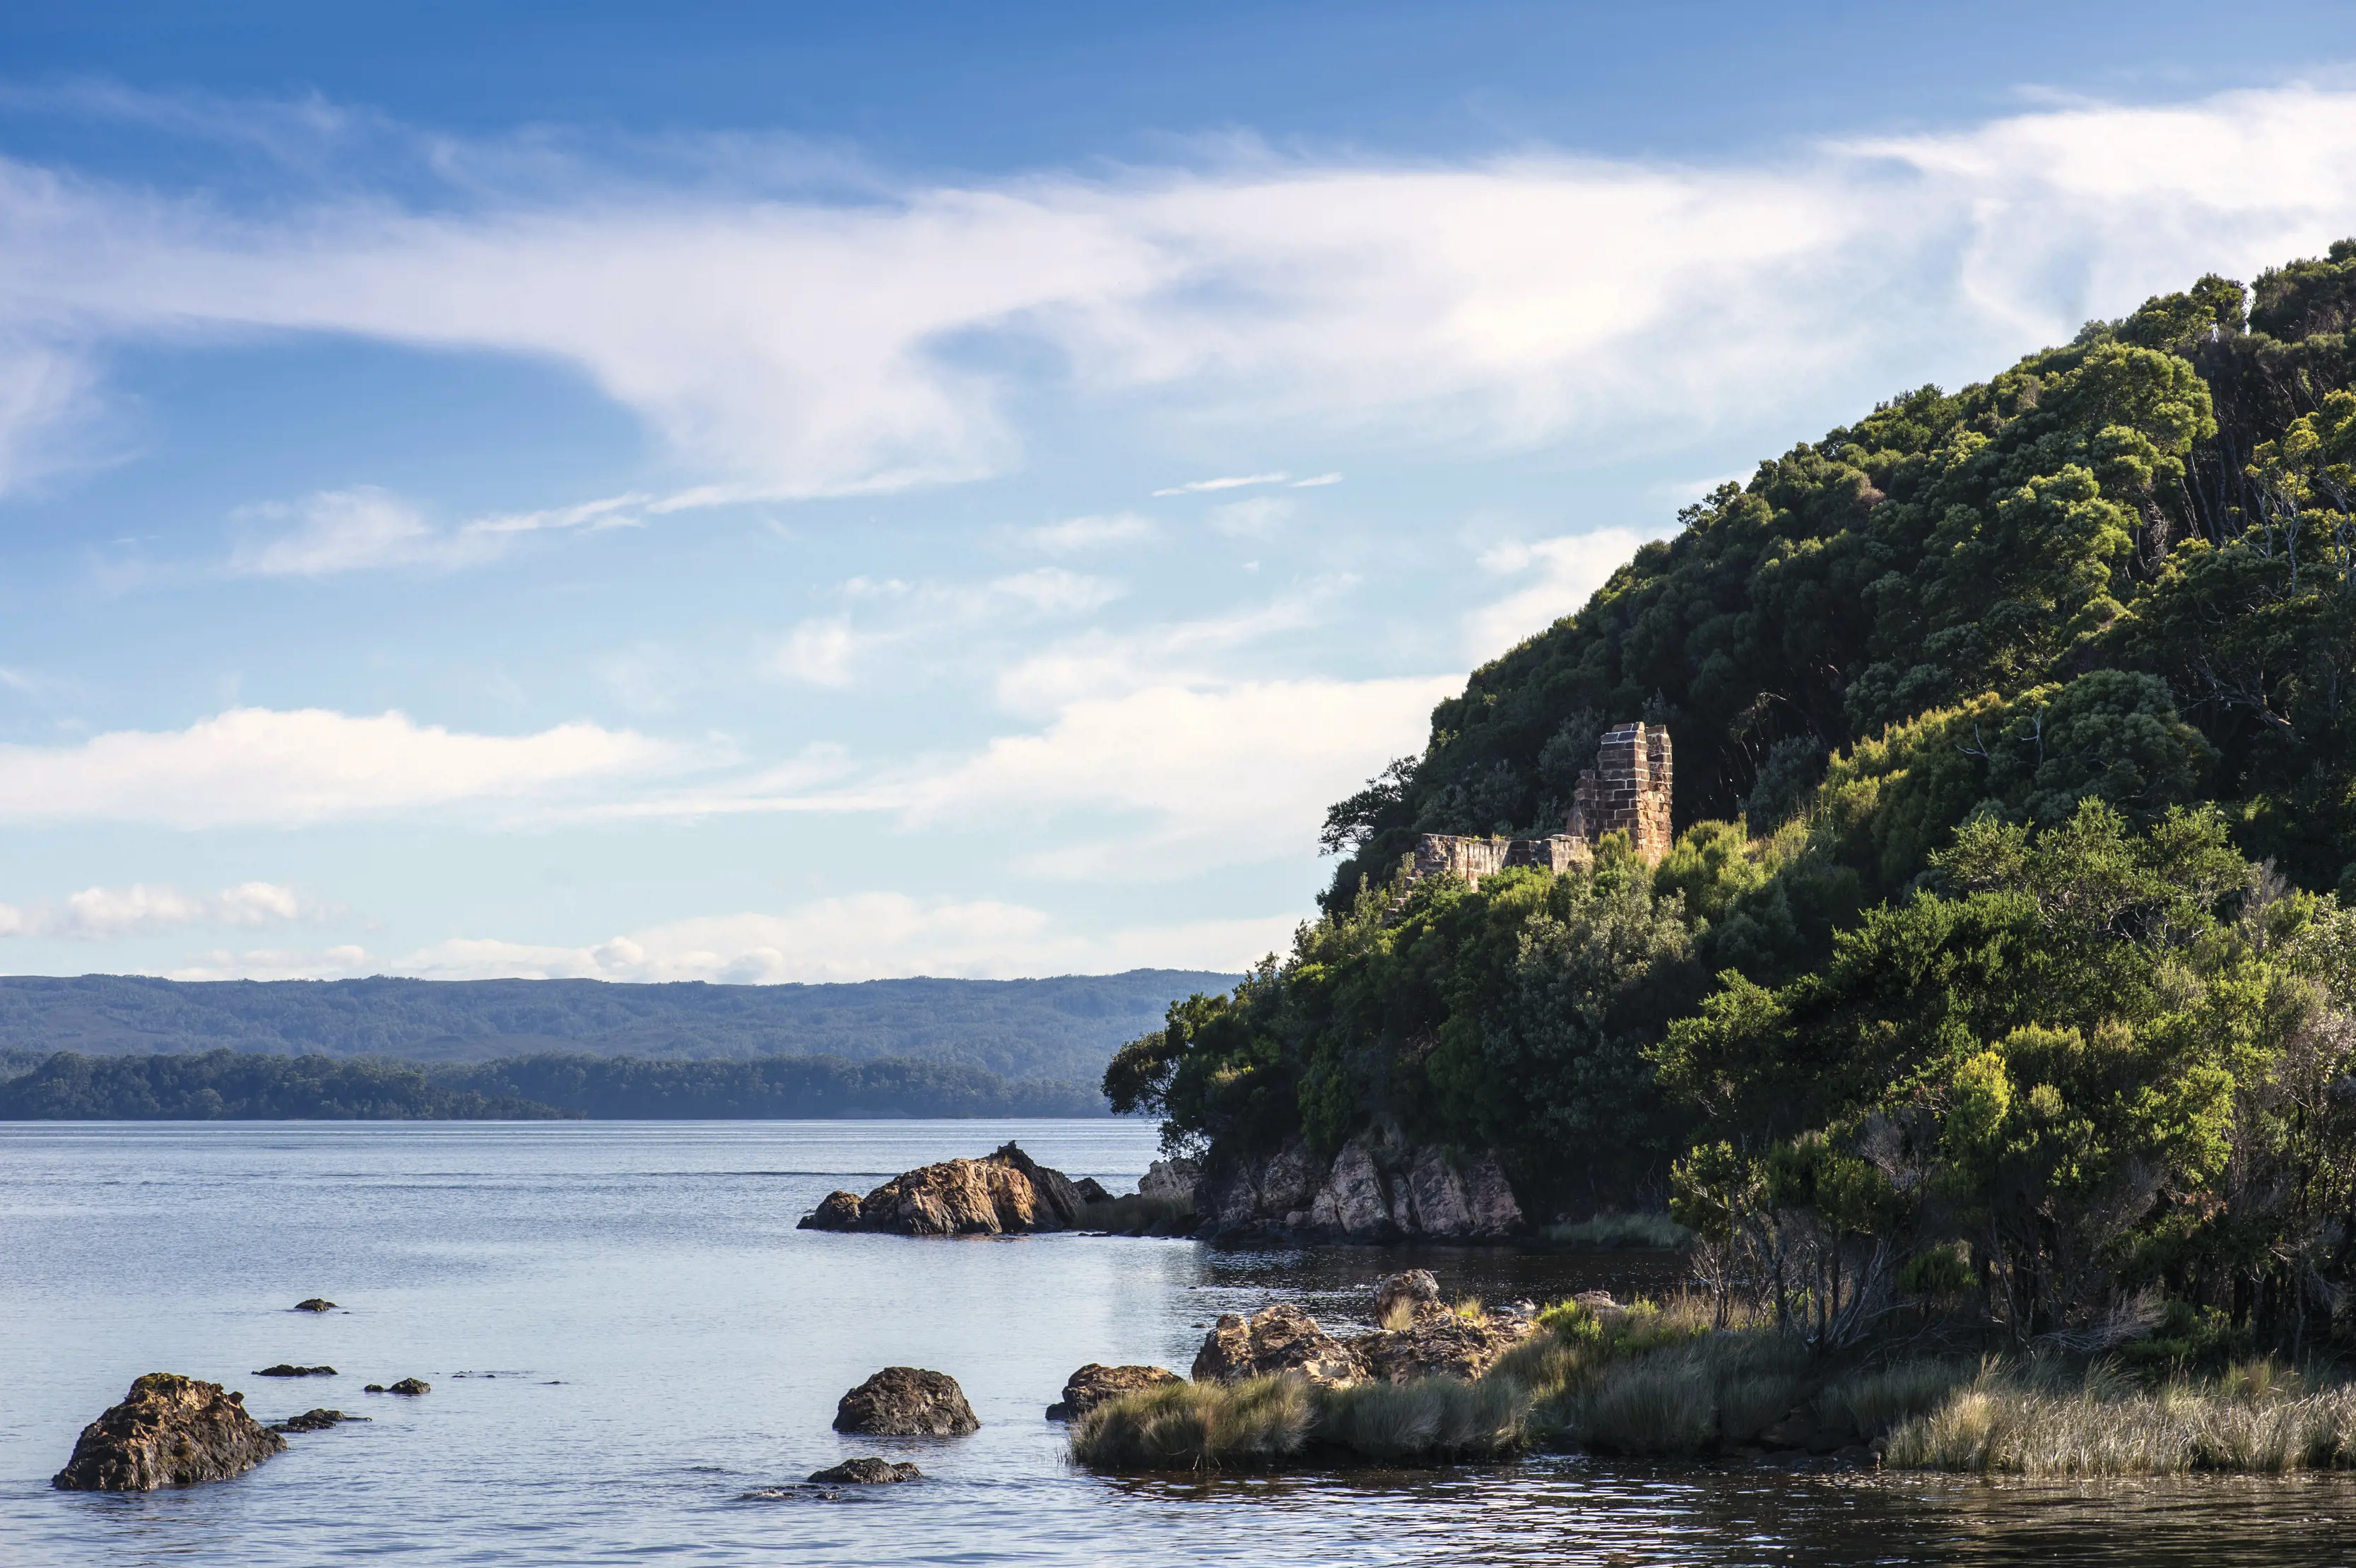 Beautiful landscape image of Sarah Island, lying in the remote reaches of the pristine Macquarie Harbour.